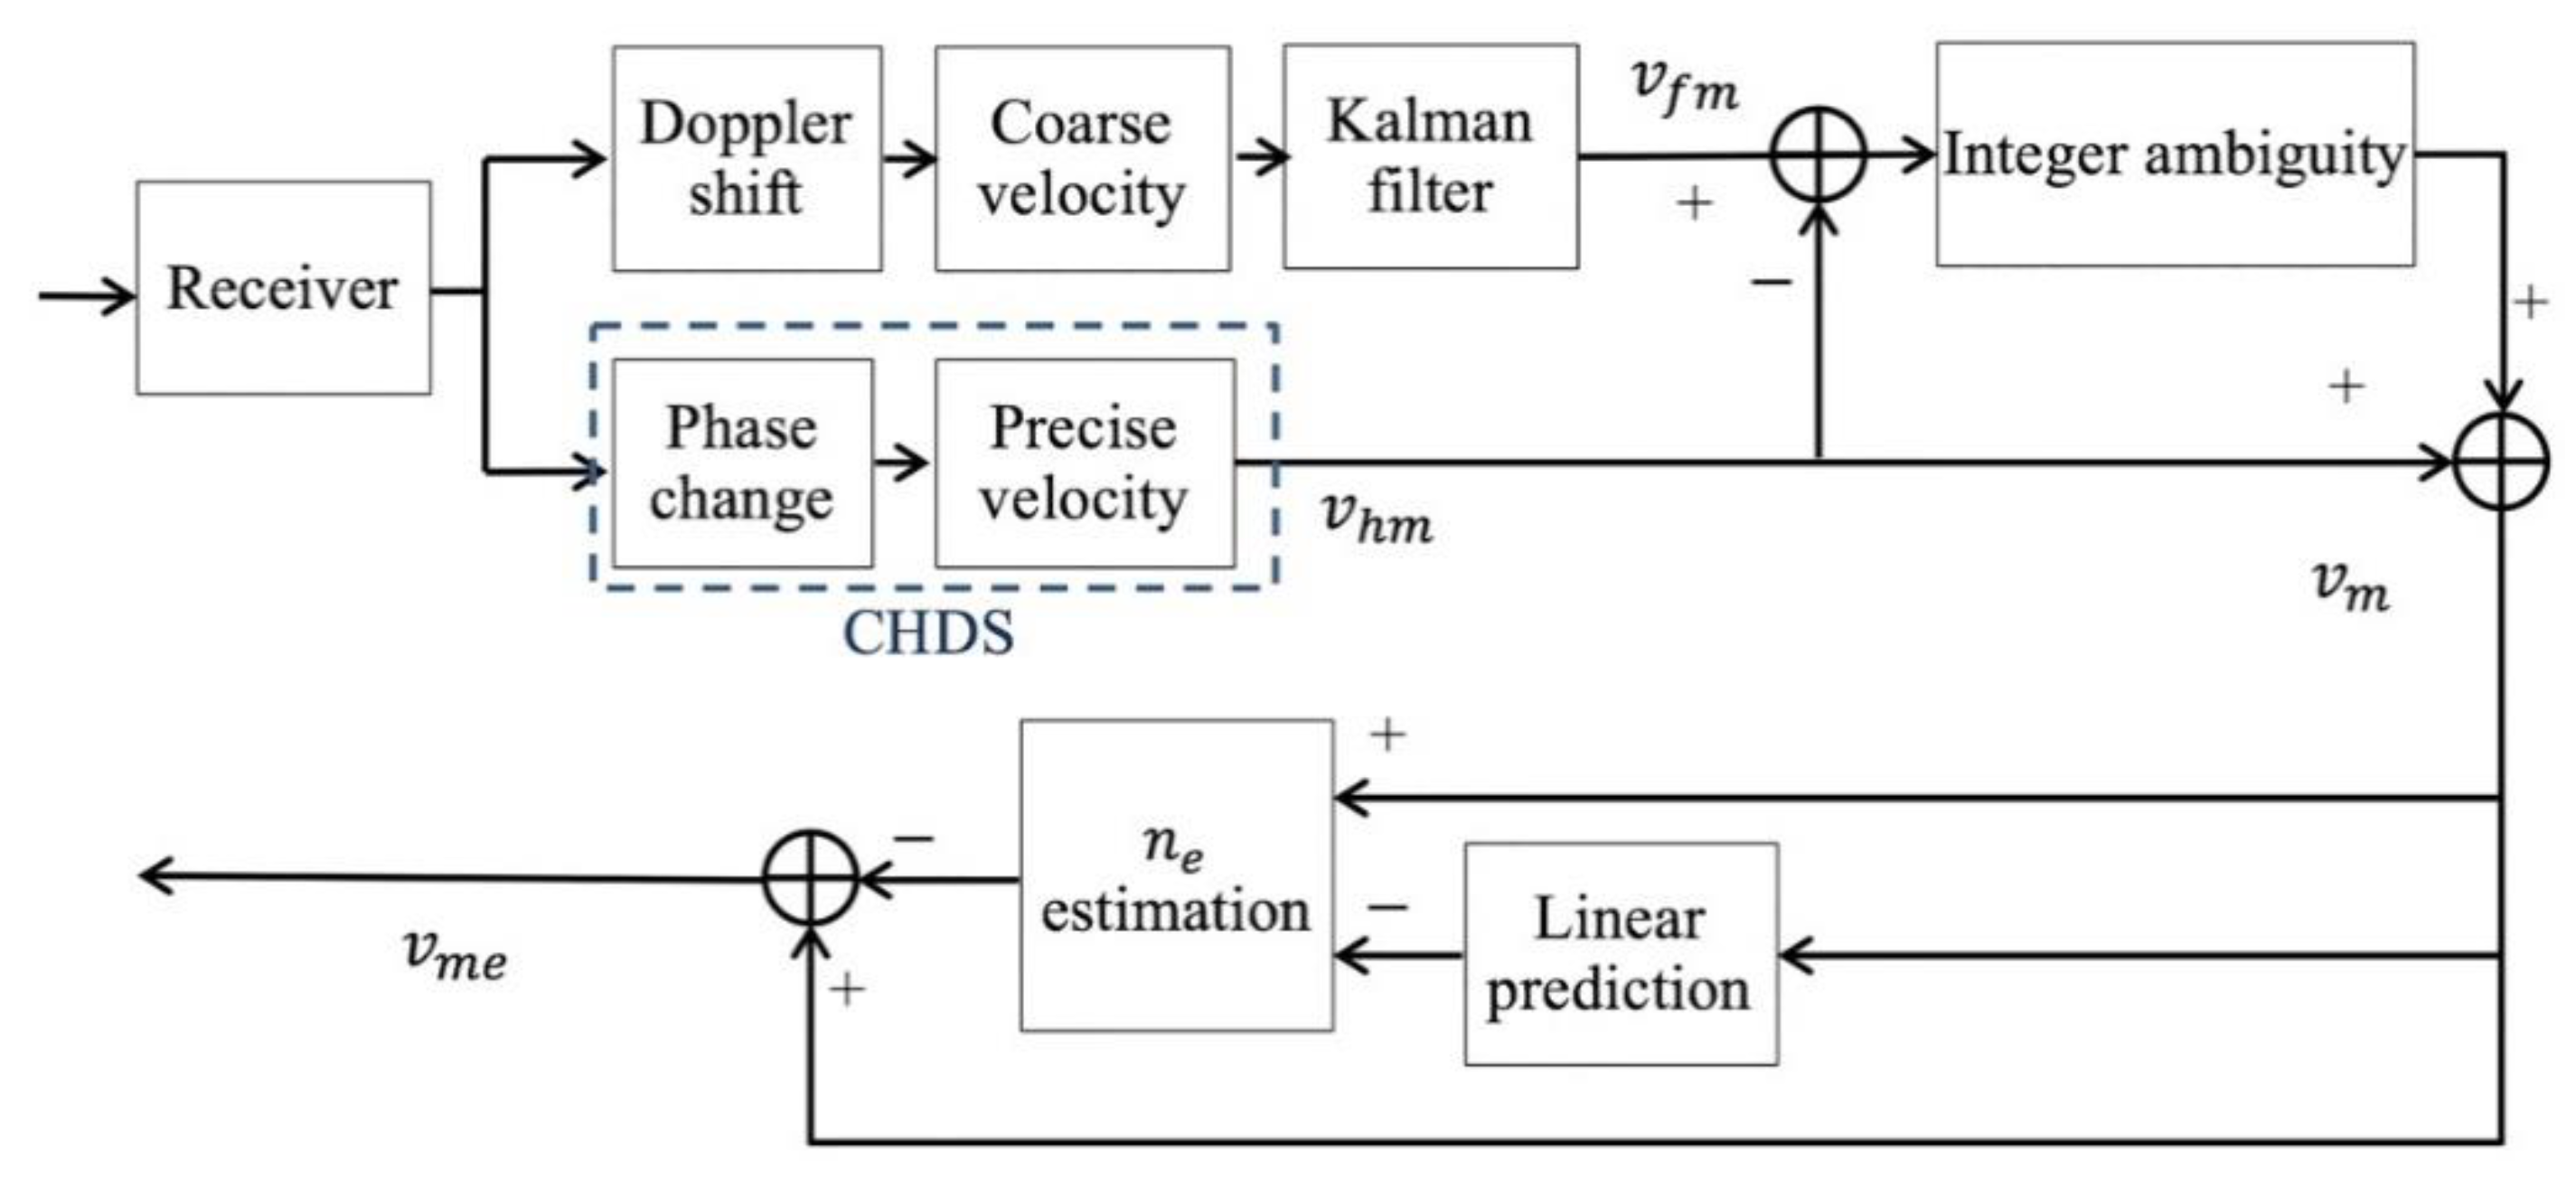 JMSE | Free Full-Text | Velocity Measurement of Coherent Doppler Sonar  Assisted by Frequency Shift, Kalman Filter and Linear Prediction